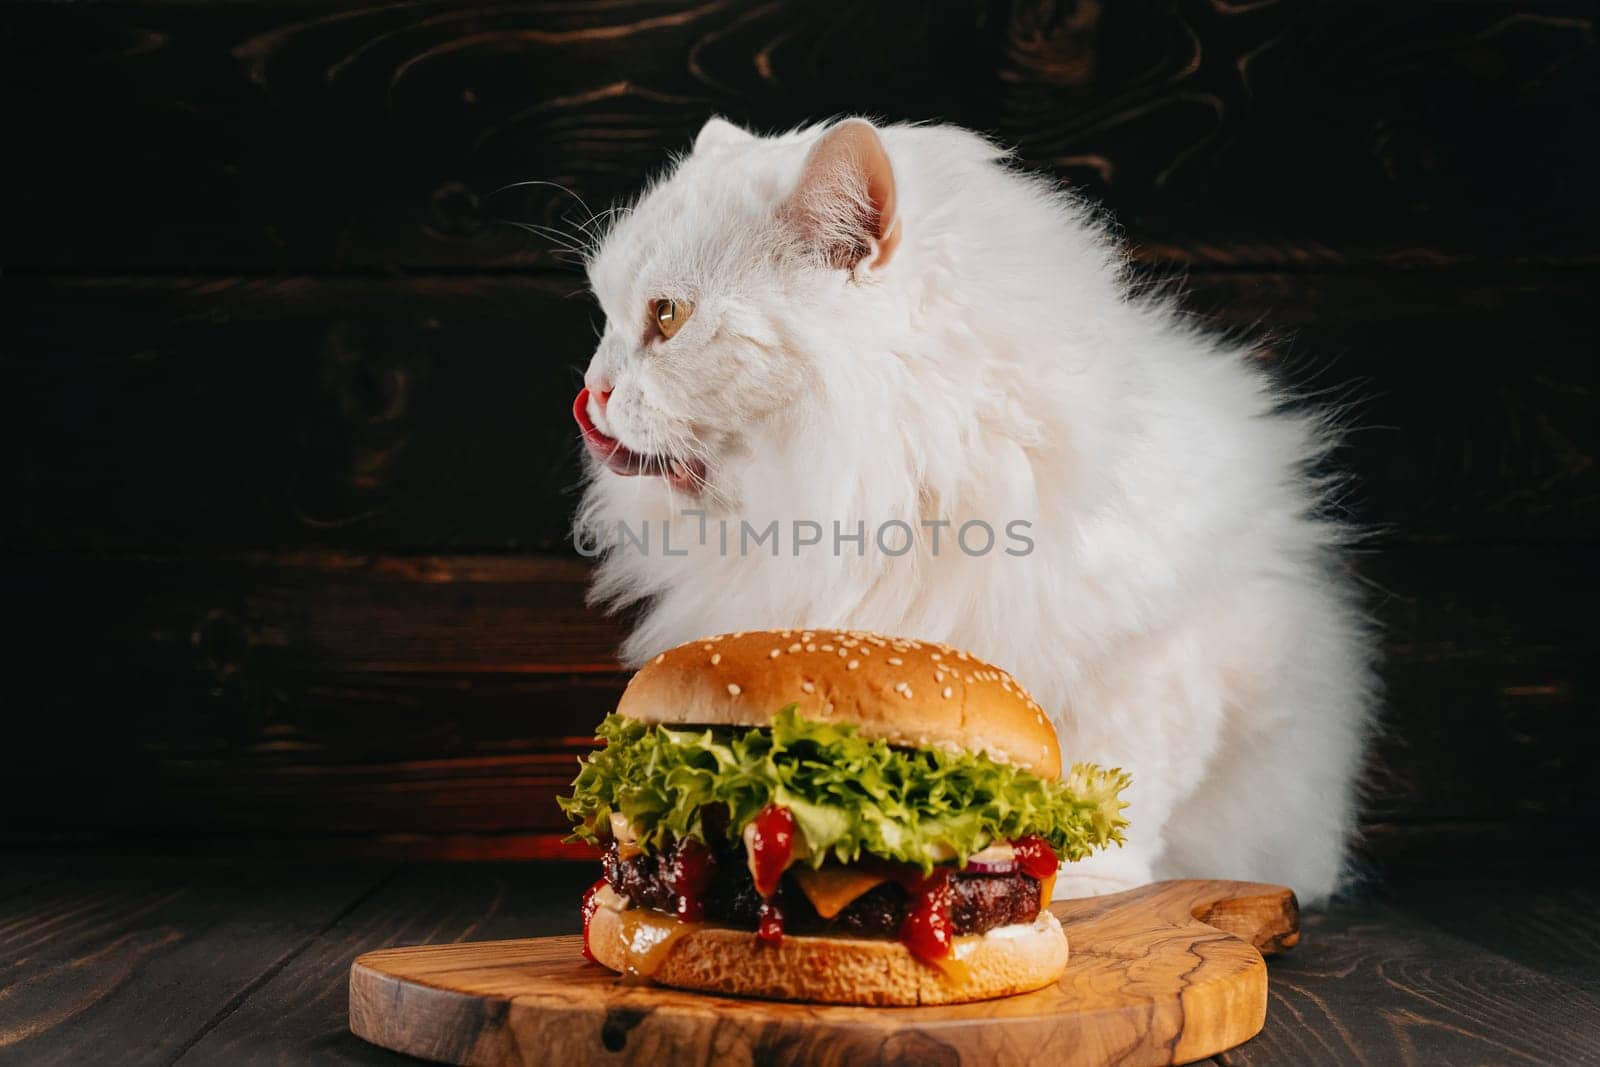 Cute fluffy cat in sunglasses near burger on dark background. Kitty with tasty fast food meal with meat cutlet, onion, vegetables, melted cheese and sauce. High quality photo